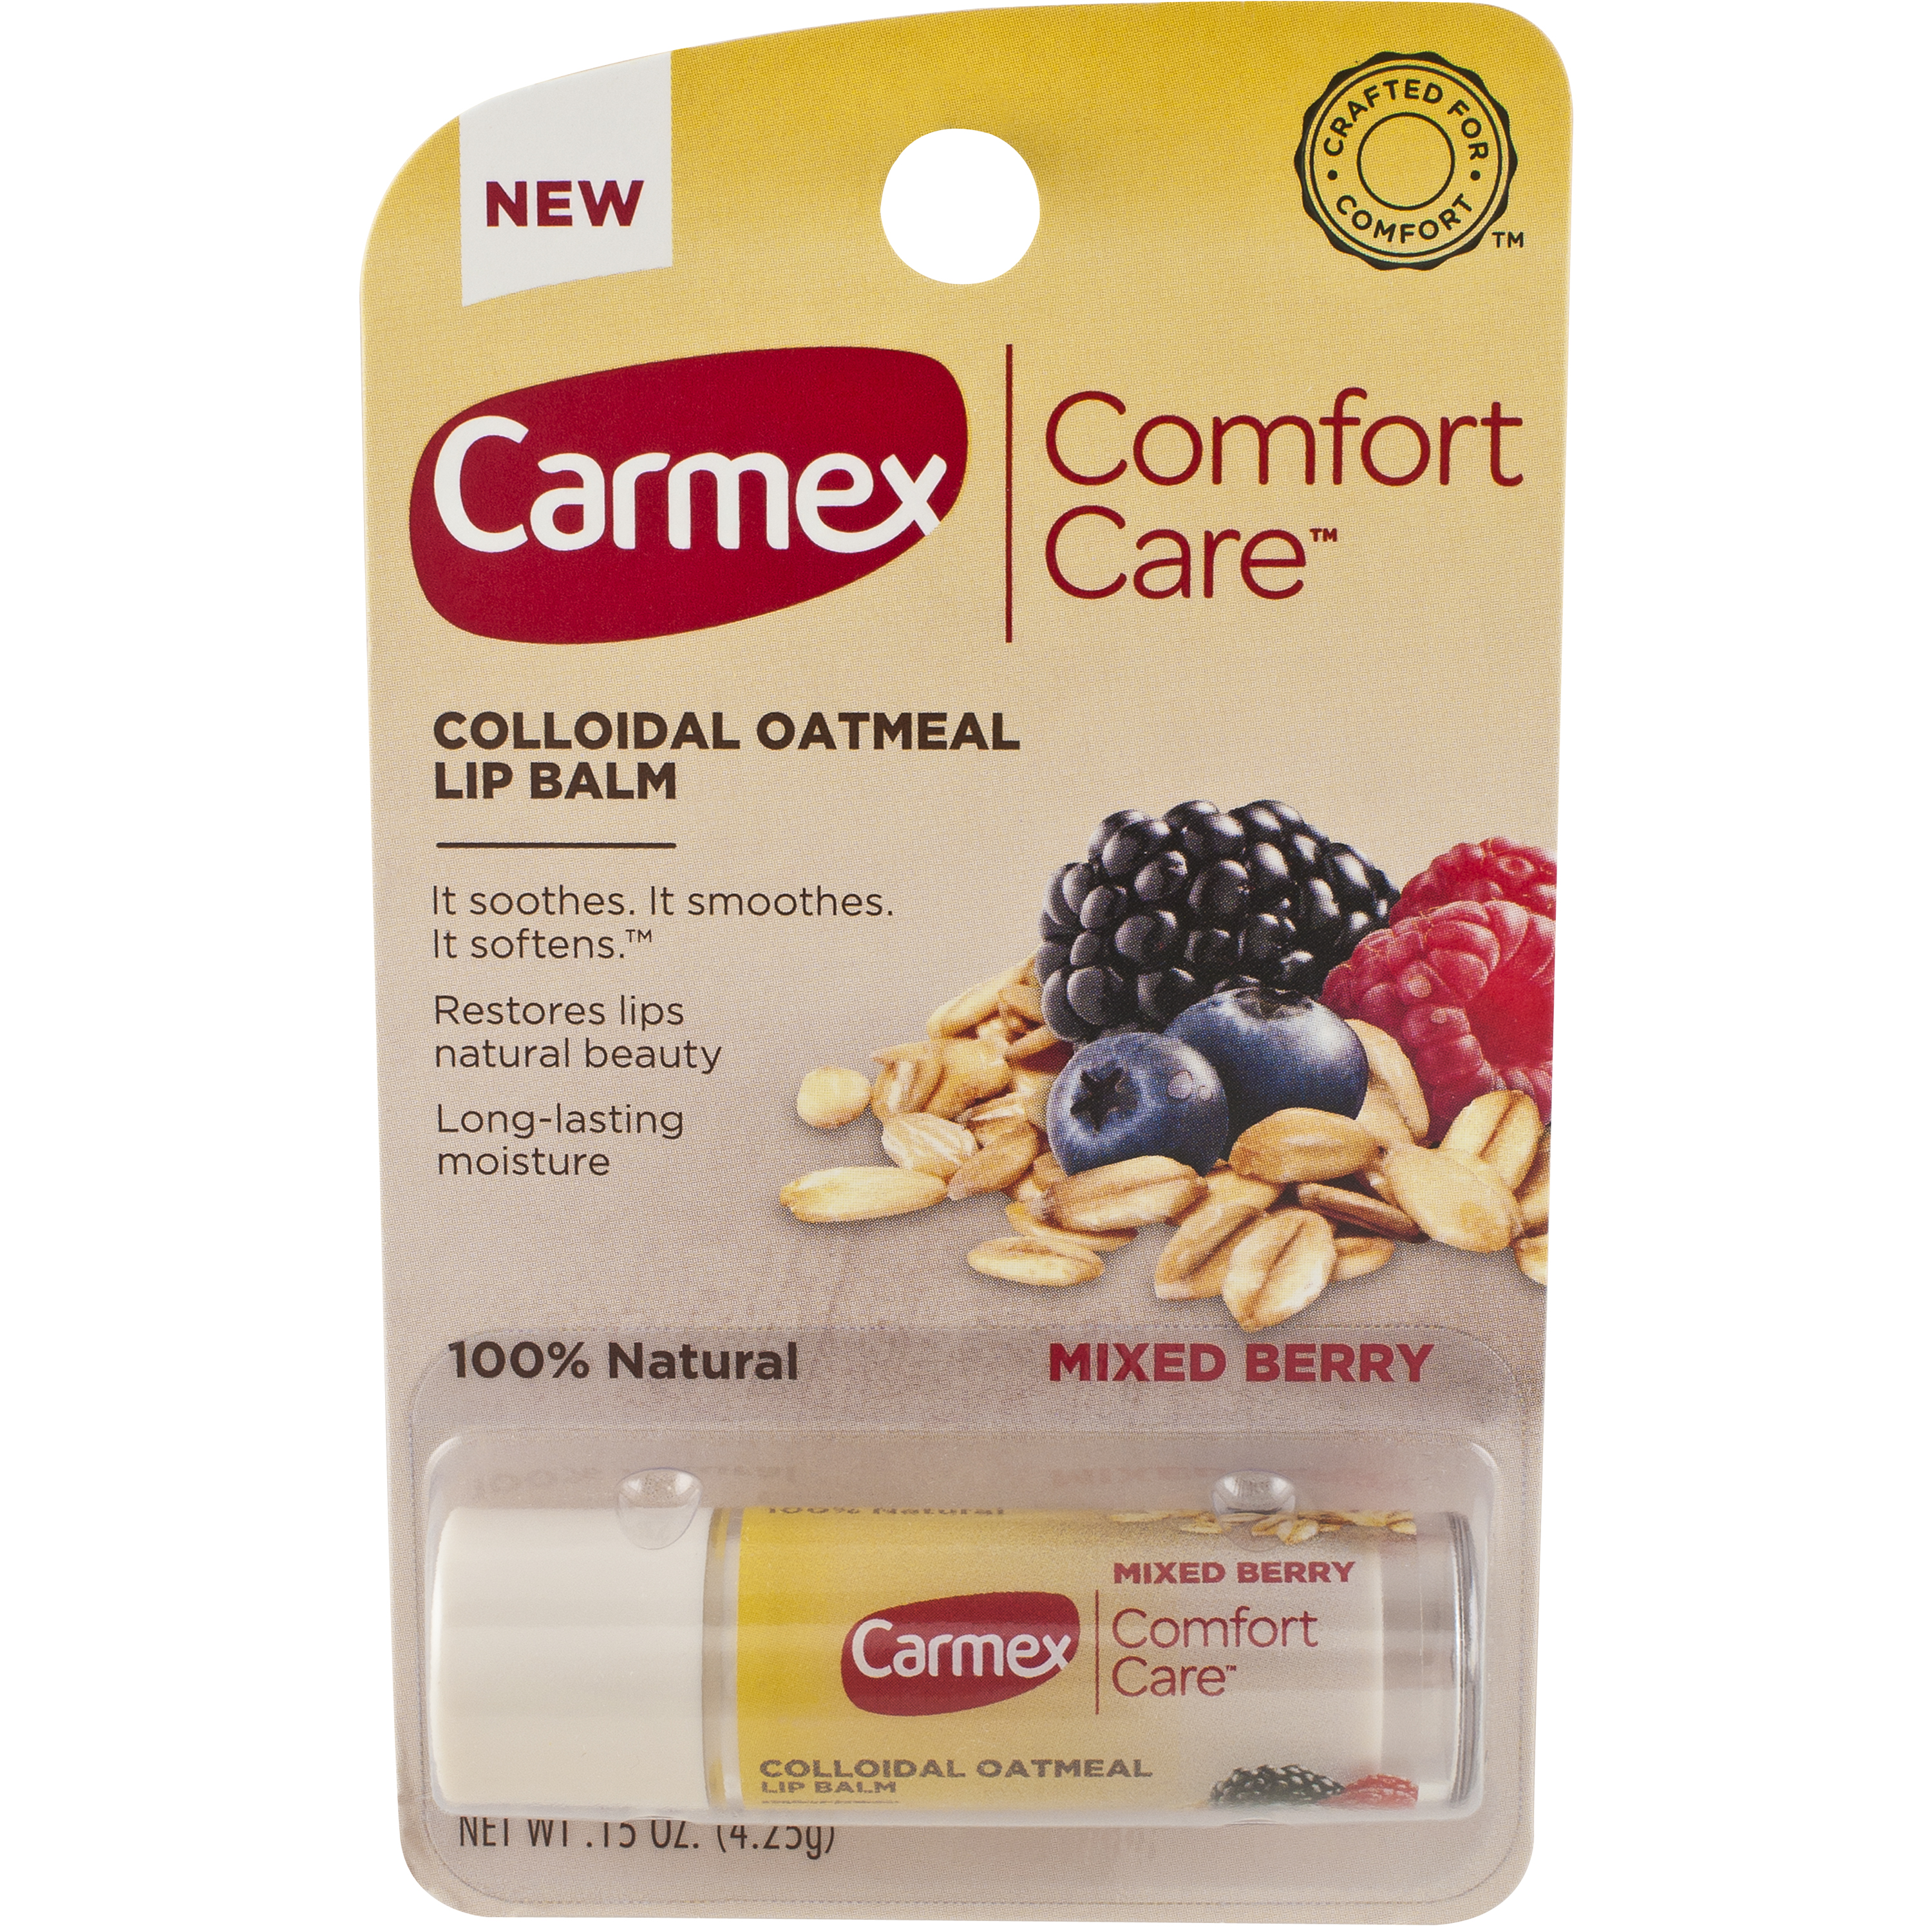 Carmex Comfort Care™ Lip Balm helps restore your lips natural beauty by Carma Laboratories, Inc.